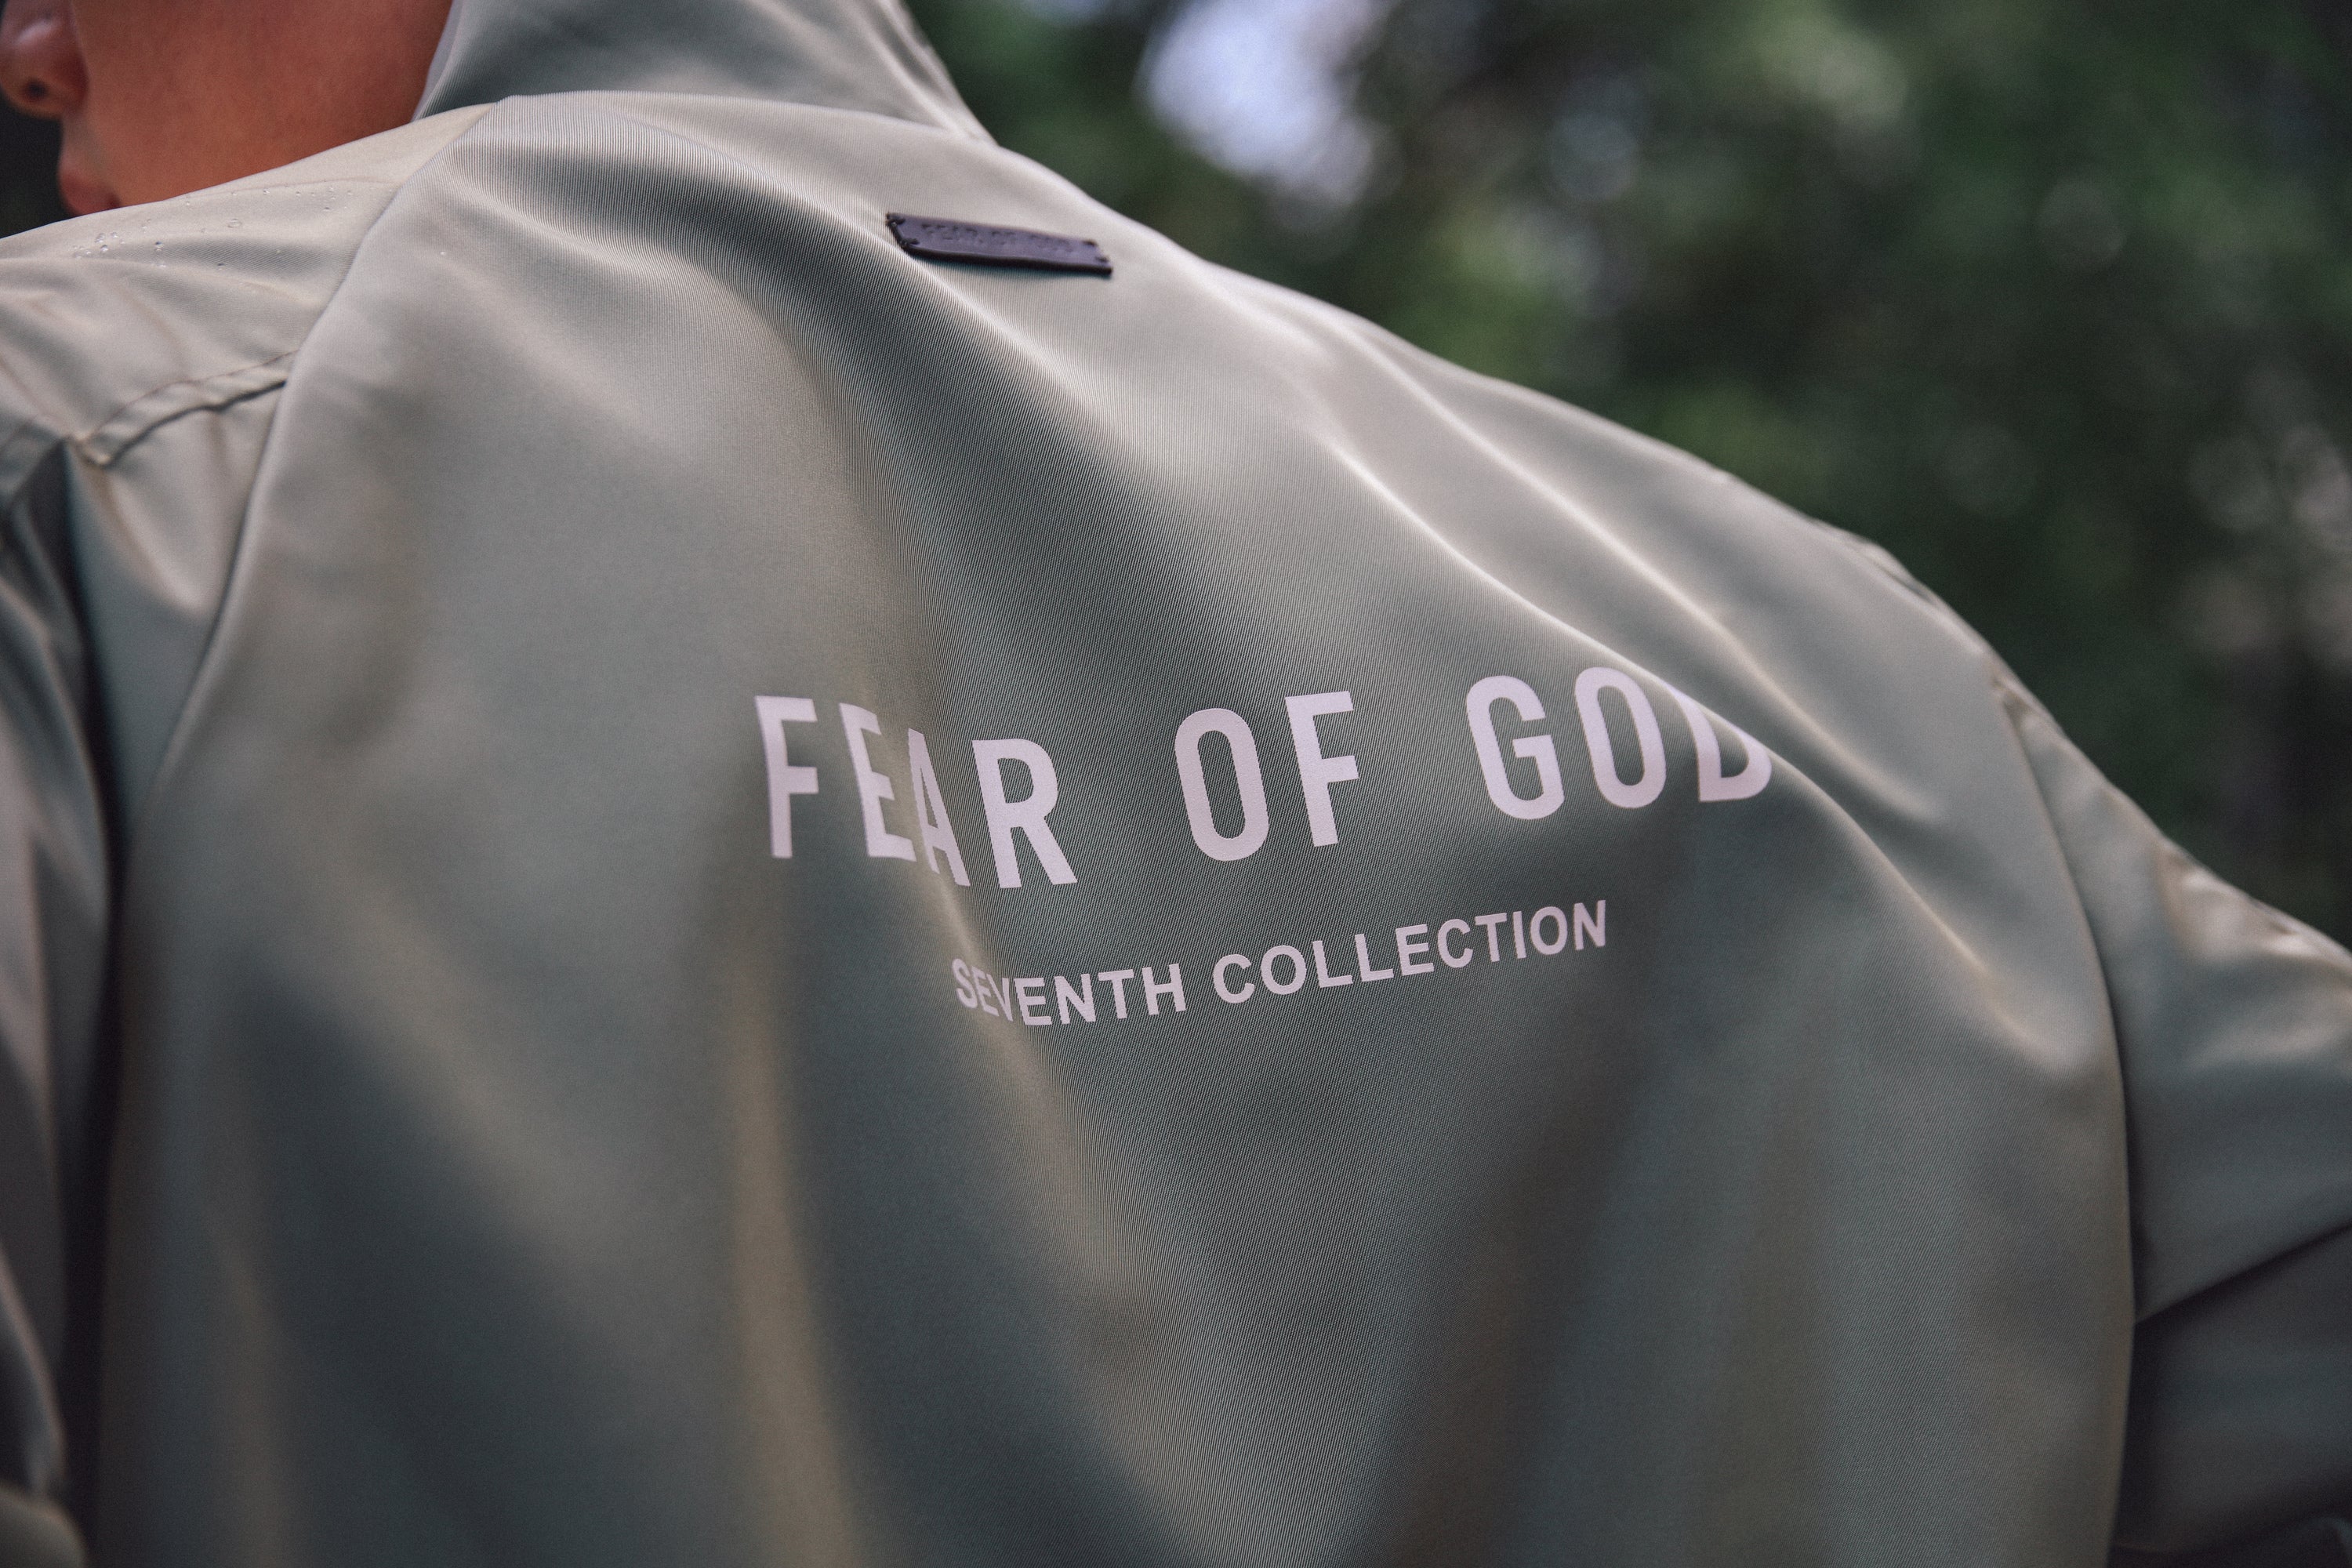 fear of god seventh collection | nate-hospital.com